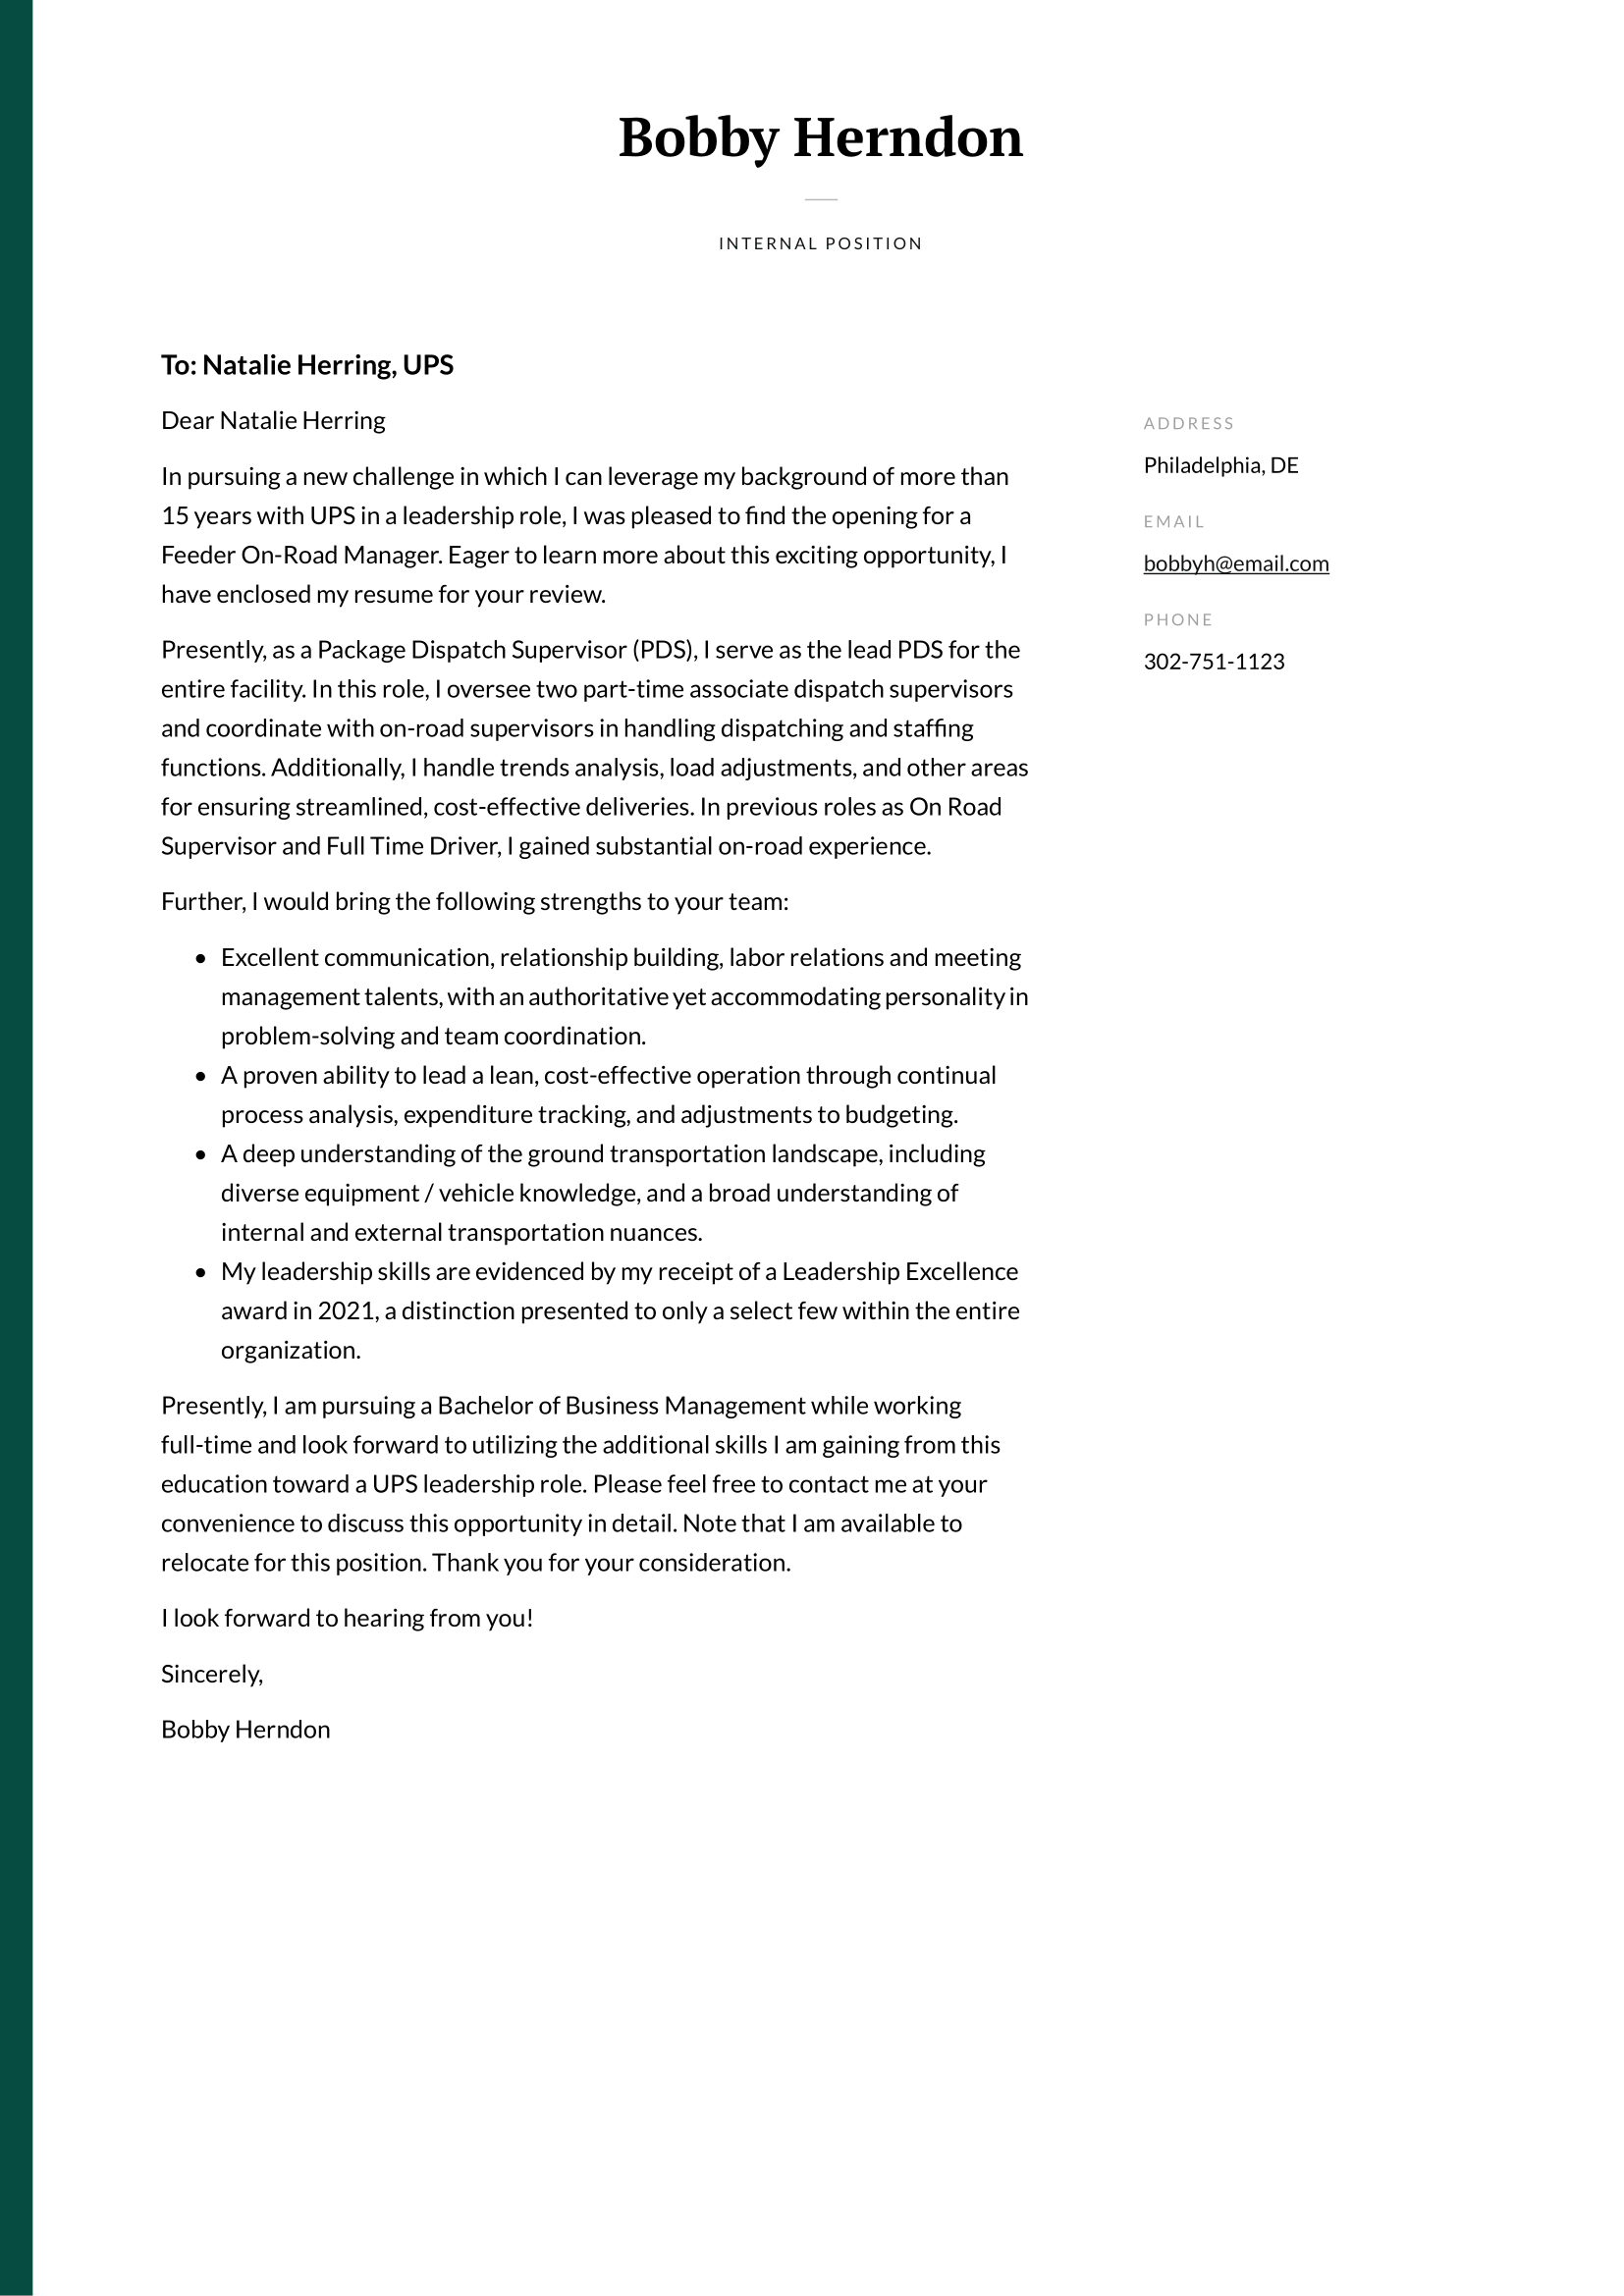 Internal Position Cover Letter Example 